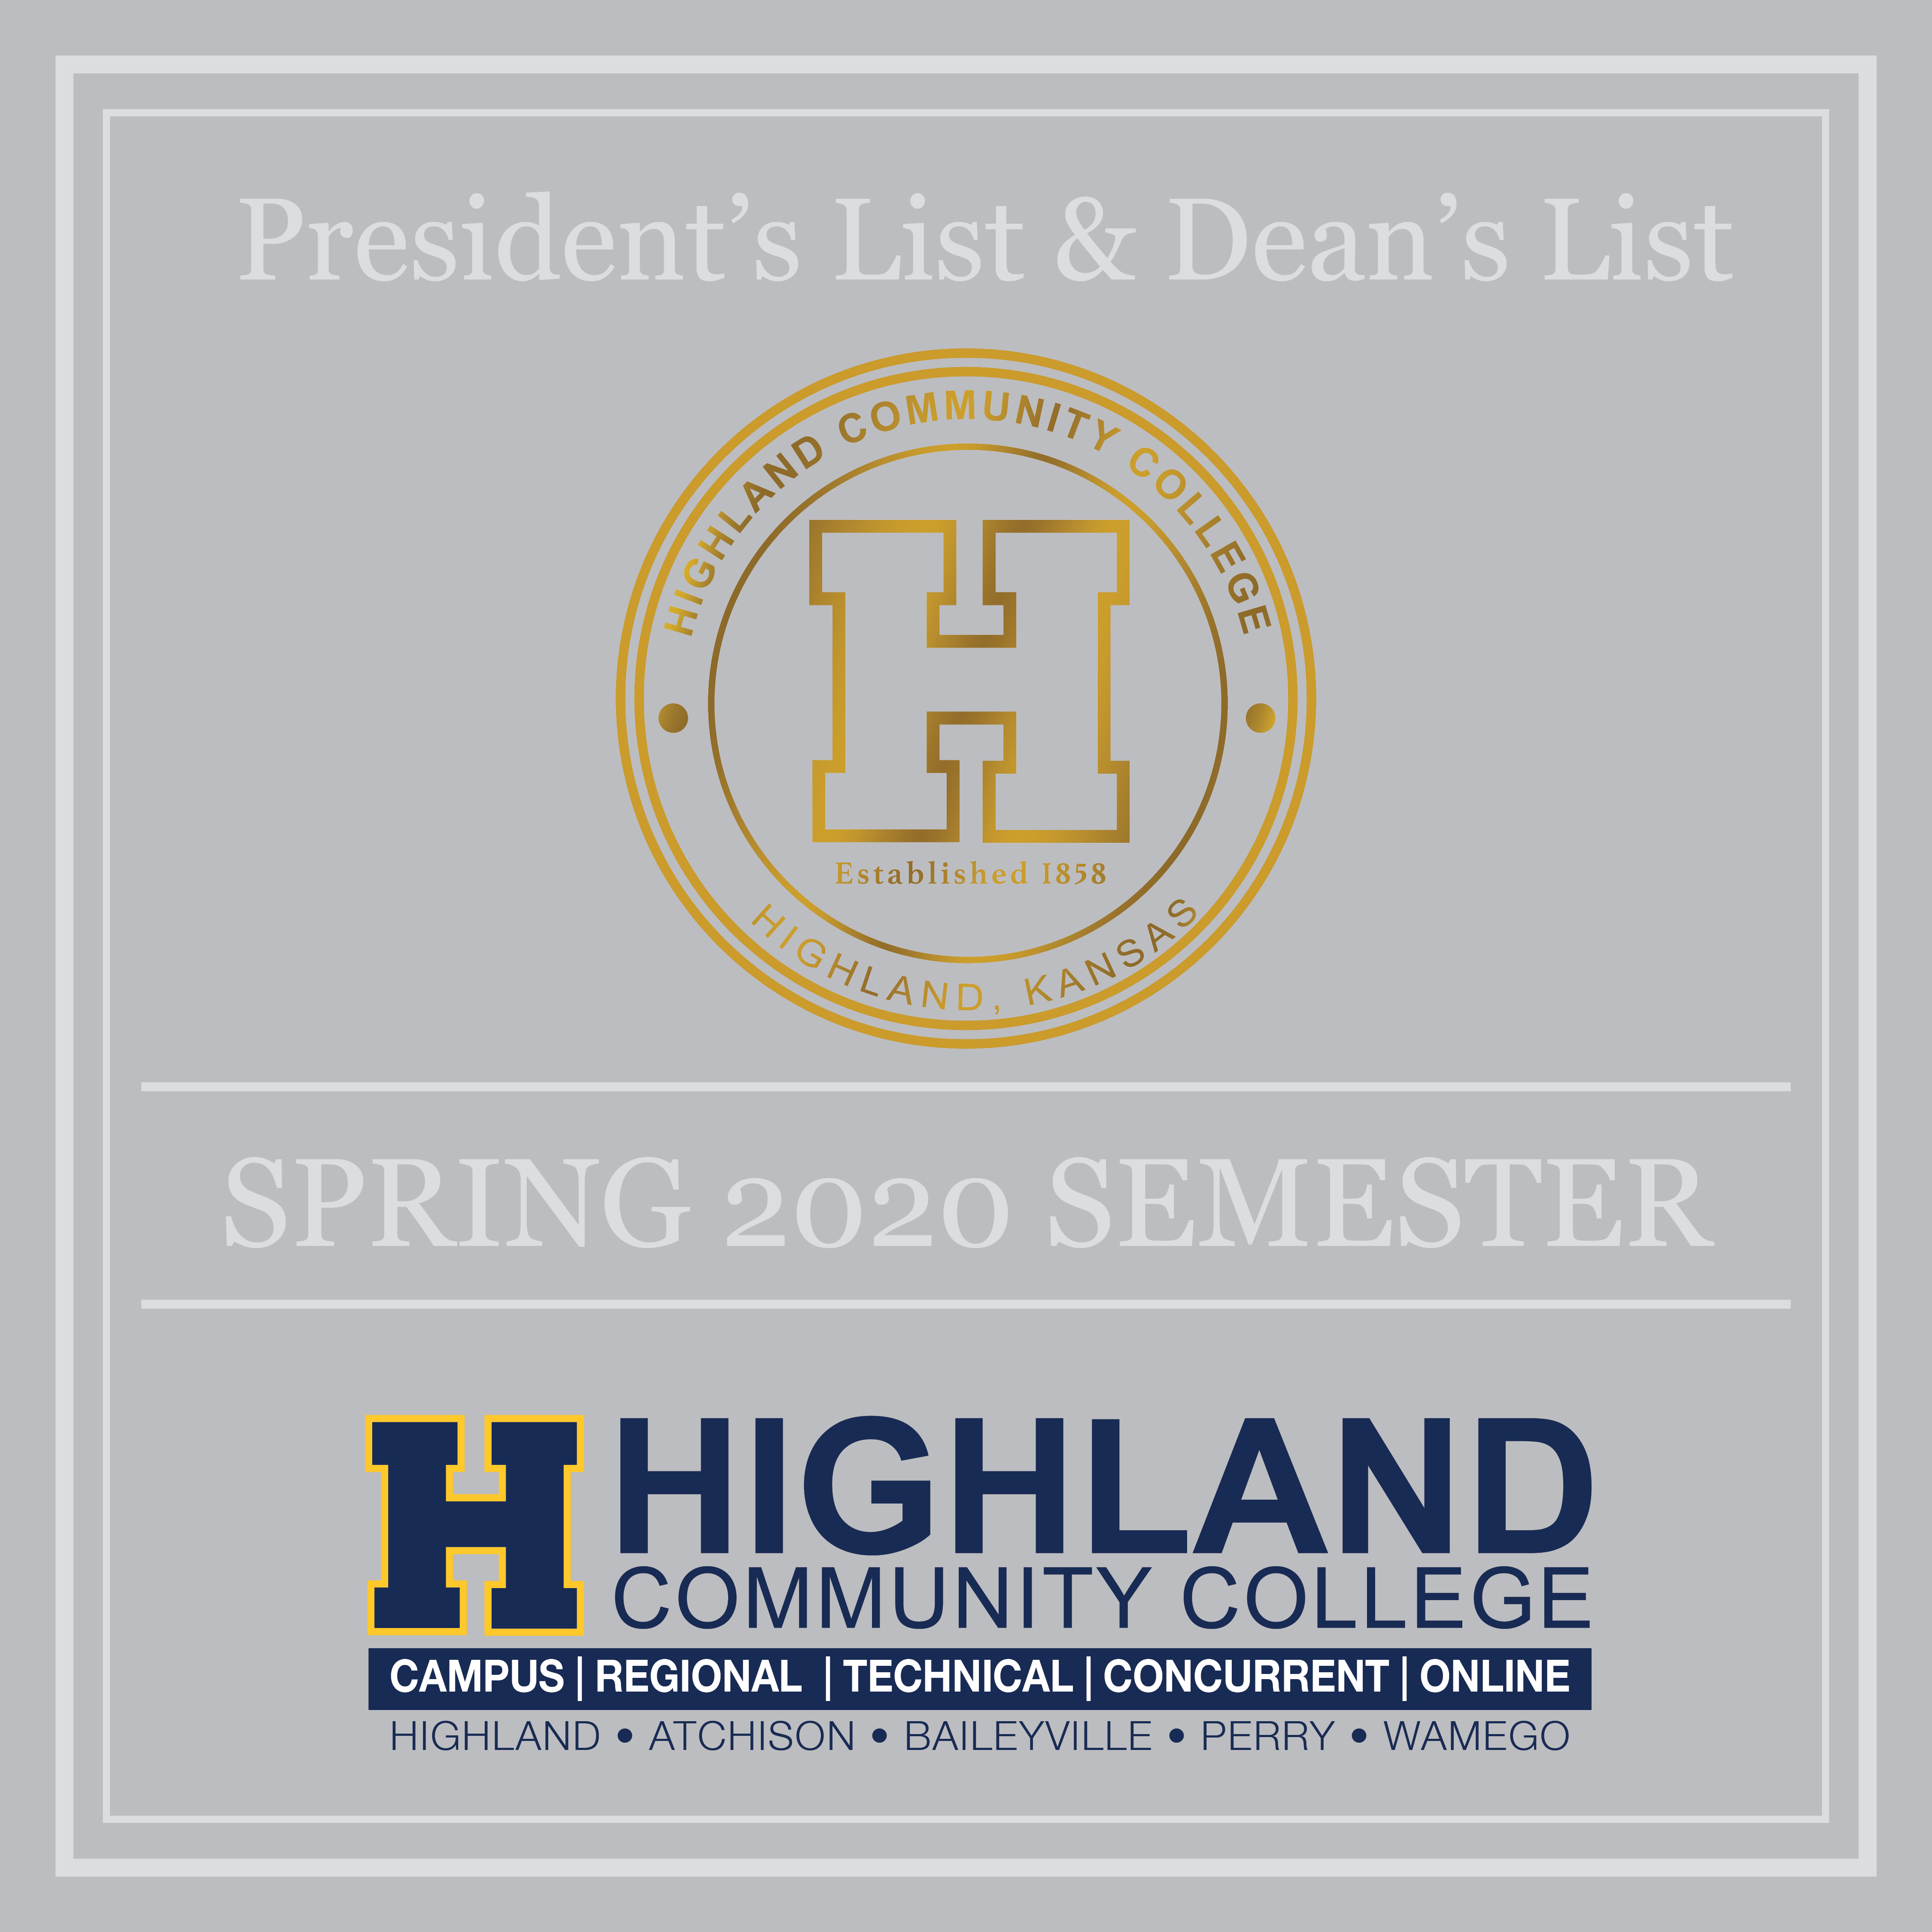 Highland Community College Announces President’s and Dean’s Lists for Spring 2020 Semester